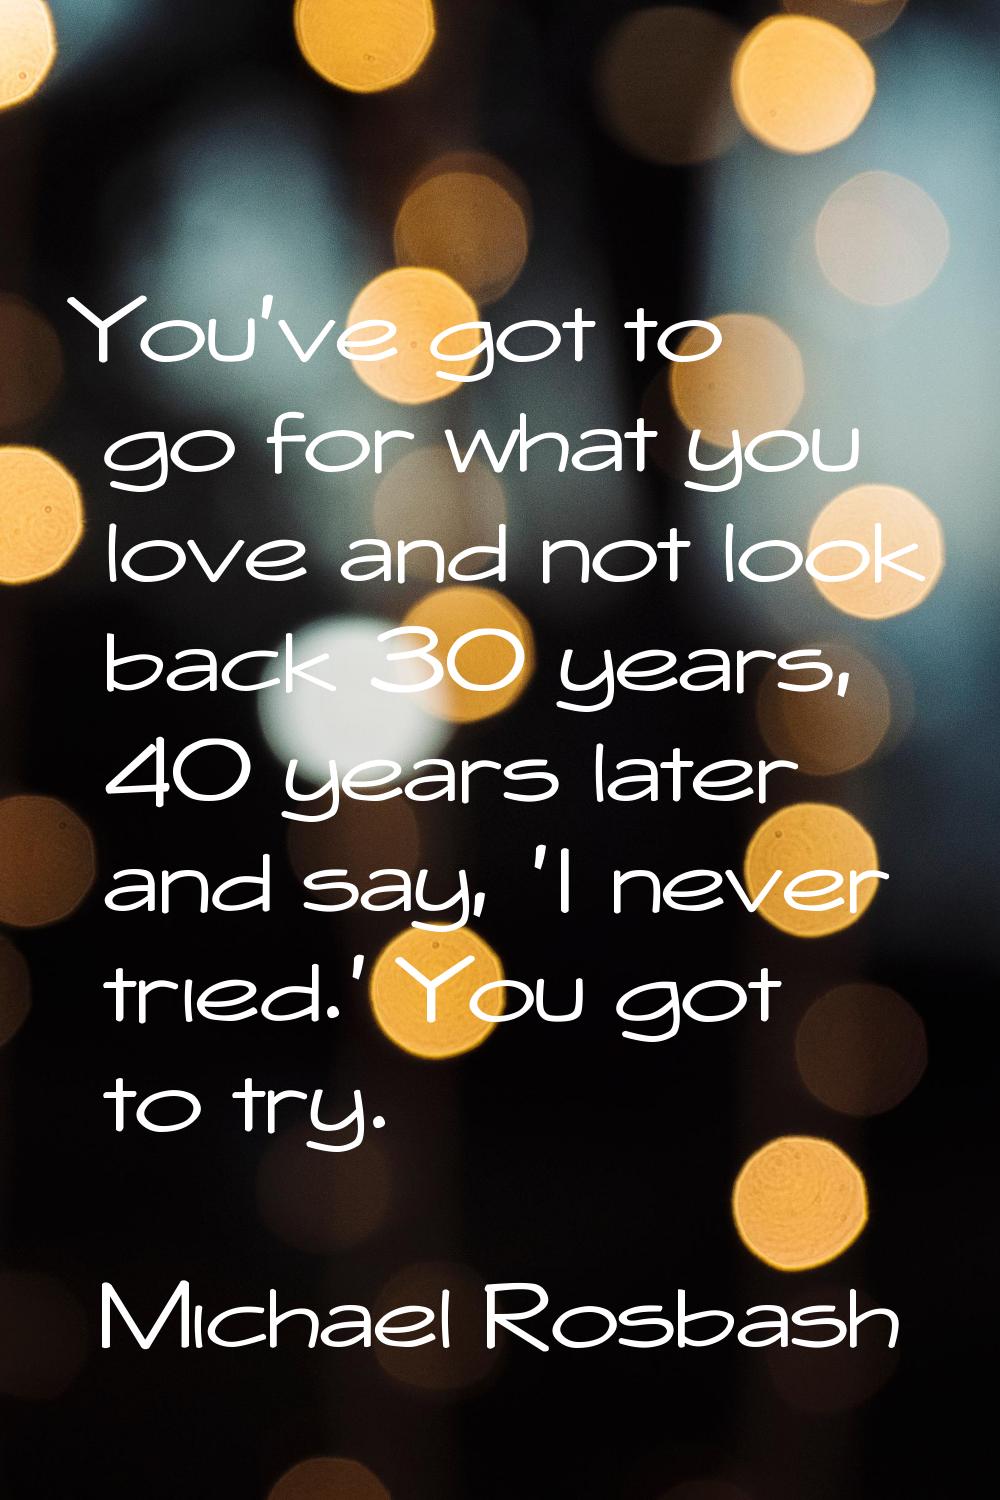 You've got to go for what you love and not look back 30 years, 40 years later and say, 'I never tri